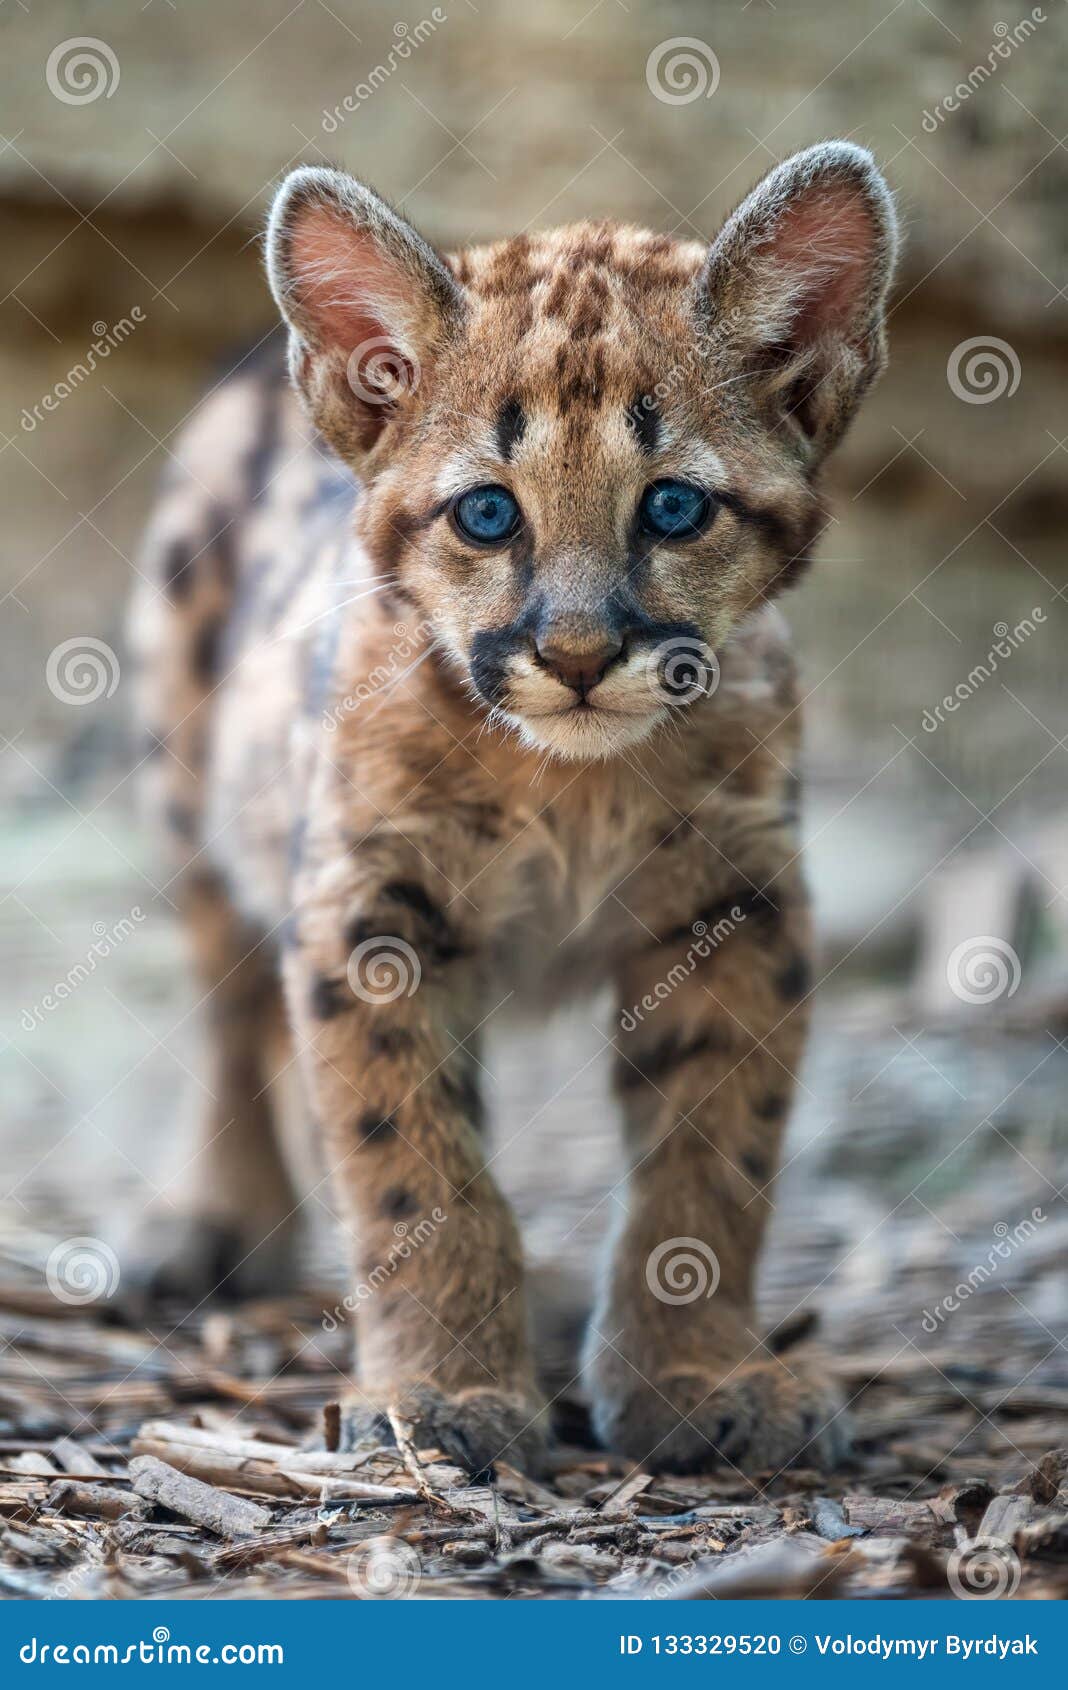 248 Baby Mountain Lion Photos Free Royalty Free Stock Photos From Dreamstime